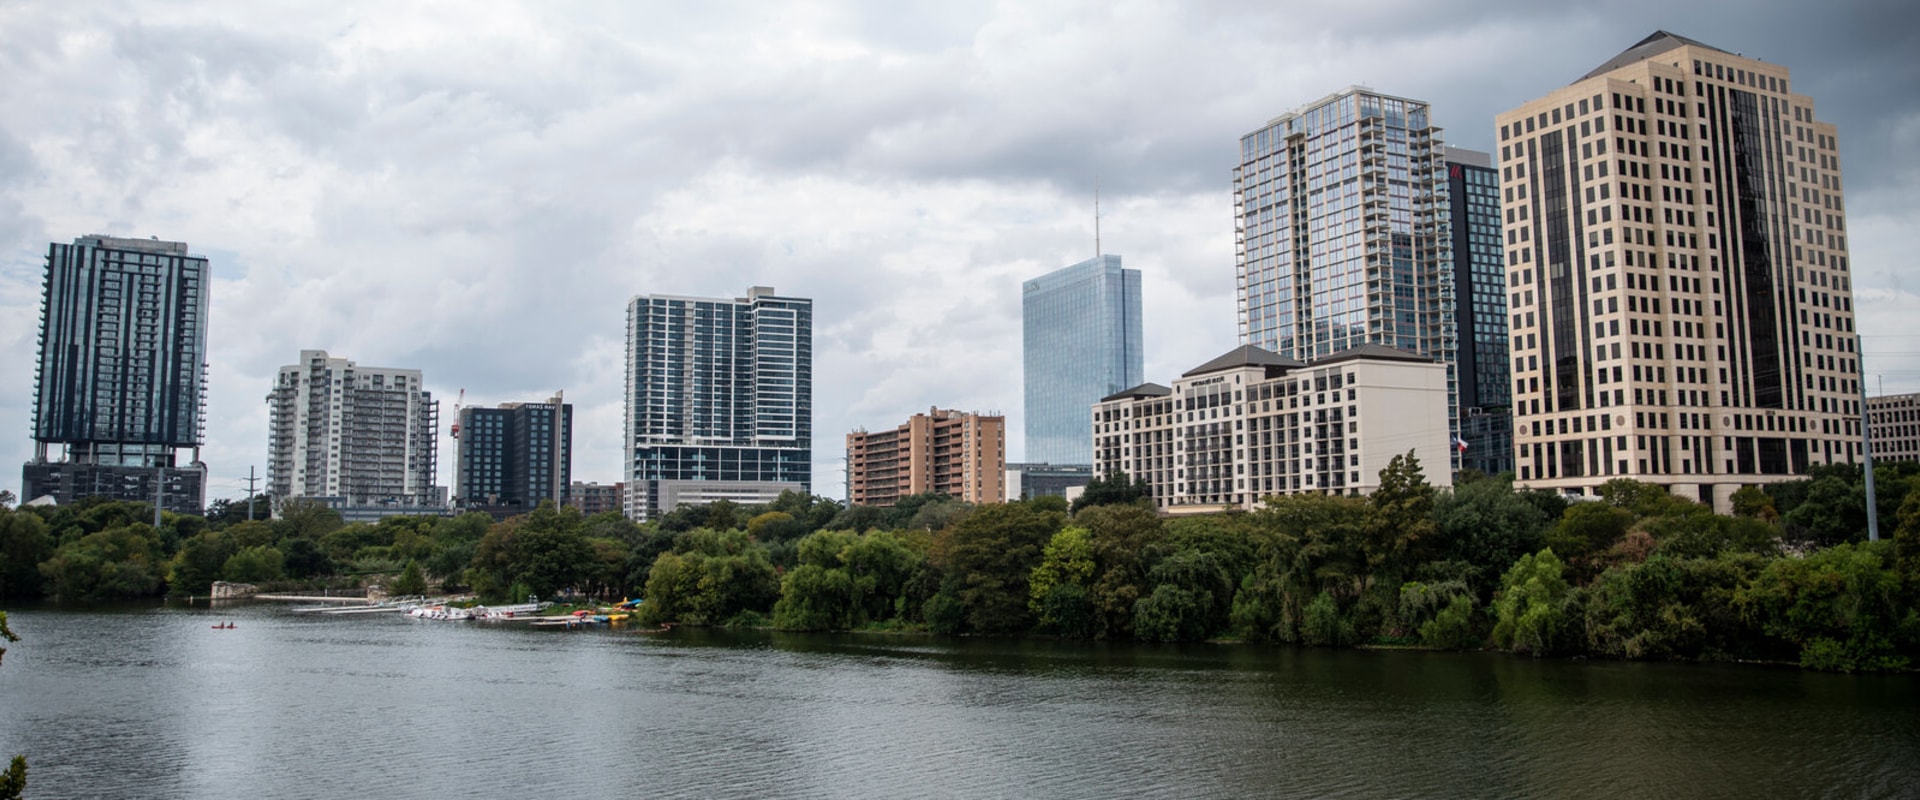 Why is austin so different from the rest of texas?